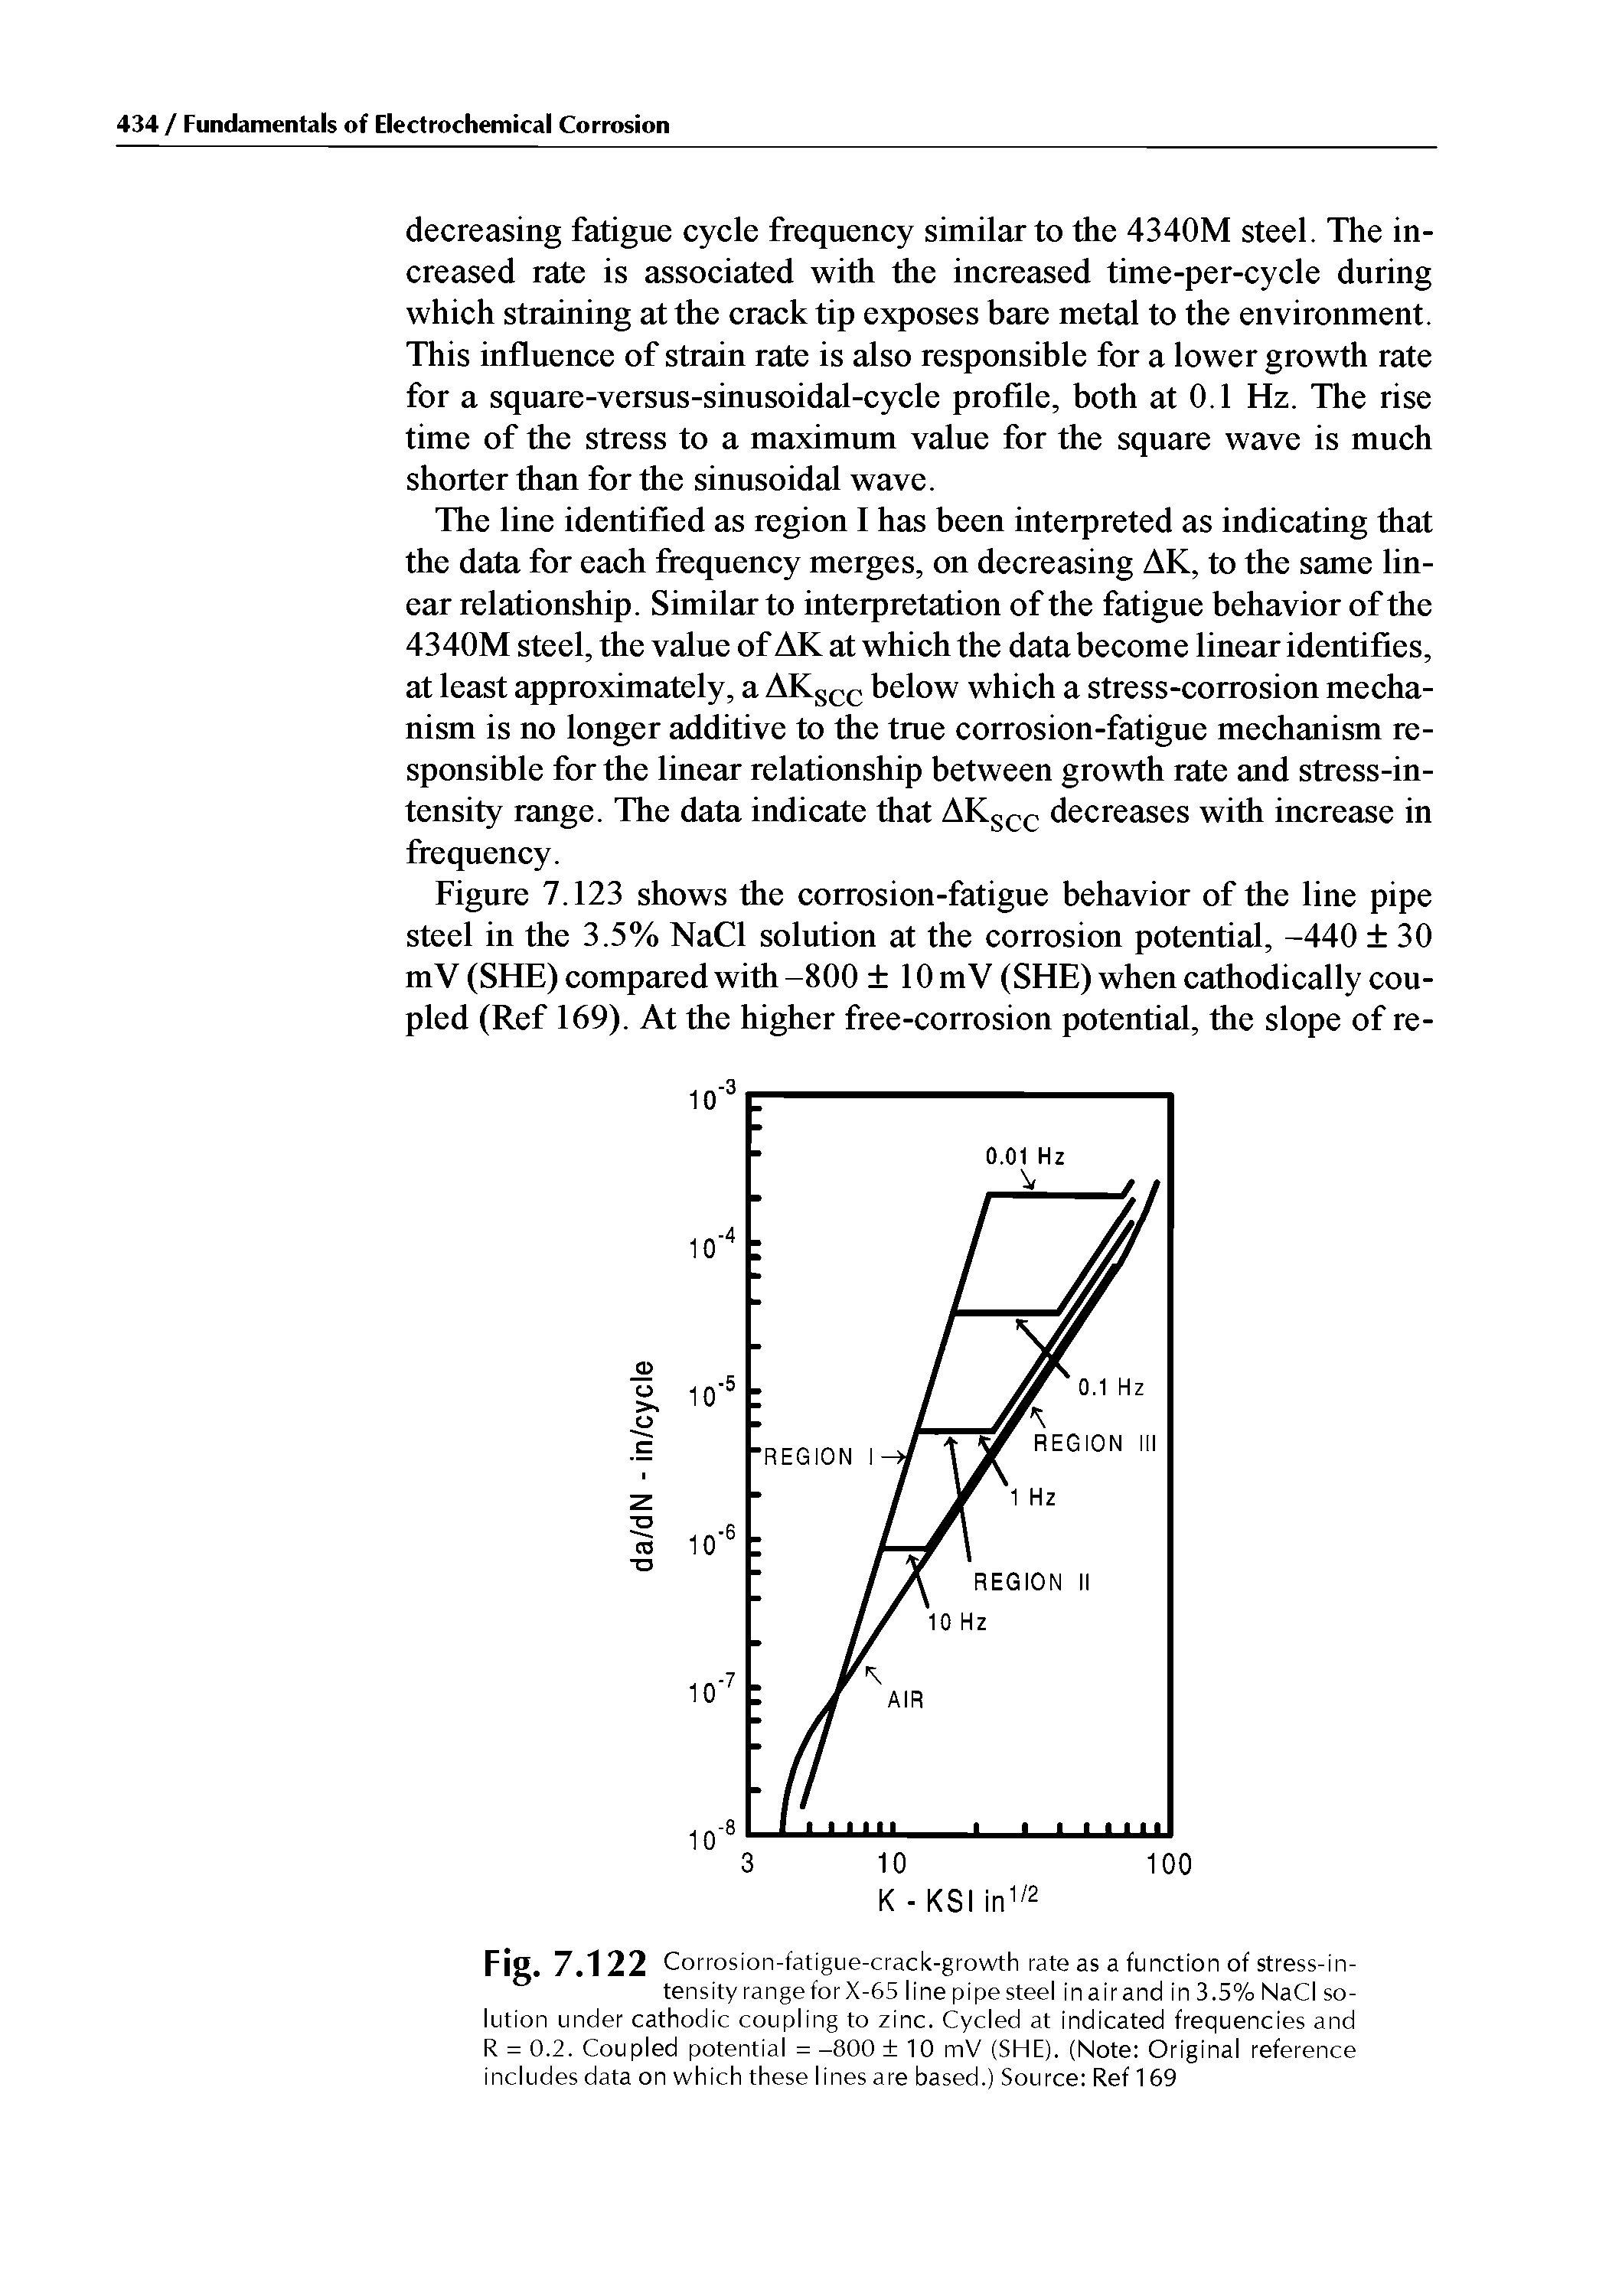 Fig. 7.122 Corrosion-fatigue-crack-growth rate as a function of stress-in-tensity range for X-65 line pipe steel in air and in 3.5% NaCl solution under cathodic coupling to zinc. Cycled at indicated frequencies and R = 0.2. Coupled potential = -800 10 mV (SHE). (Note Original reference includes data on which these lines are based.) Source Ref 1 69...